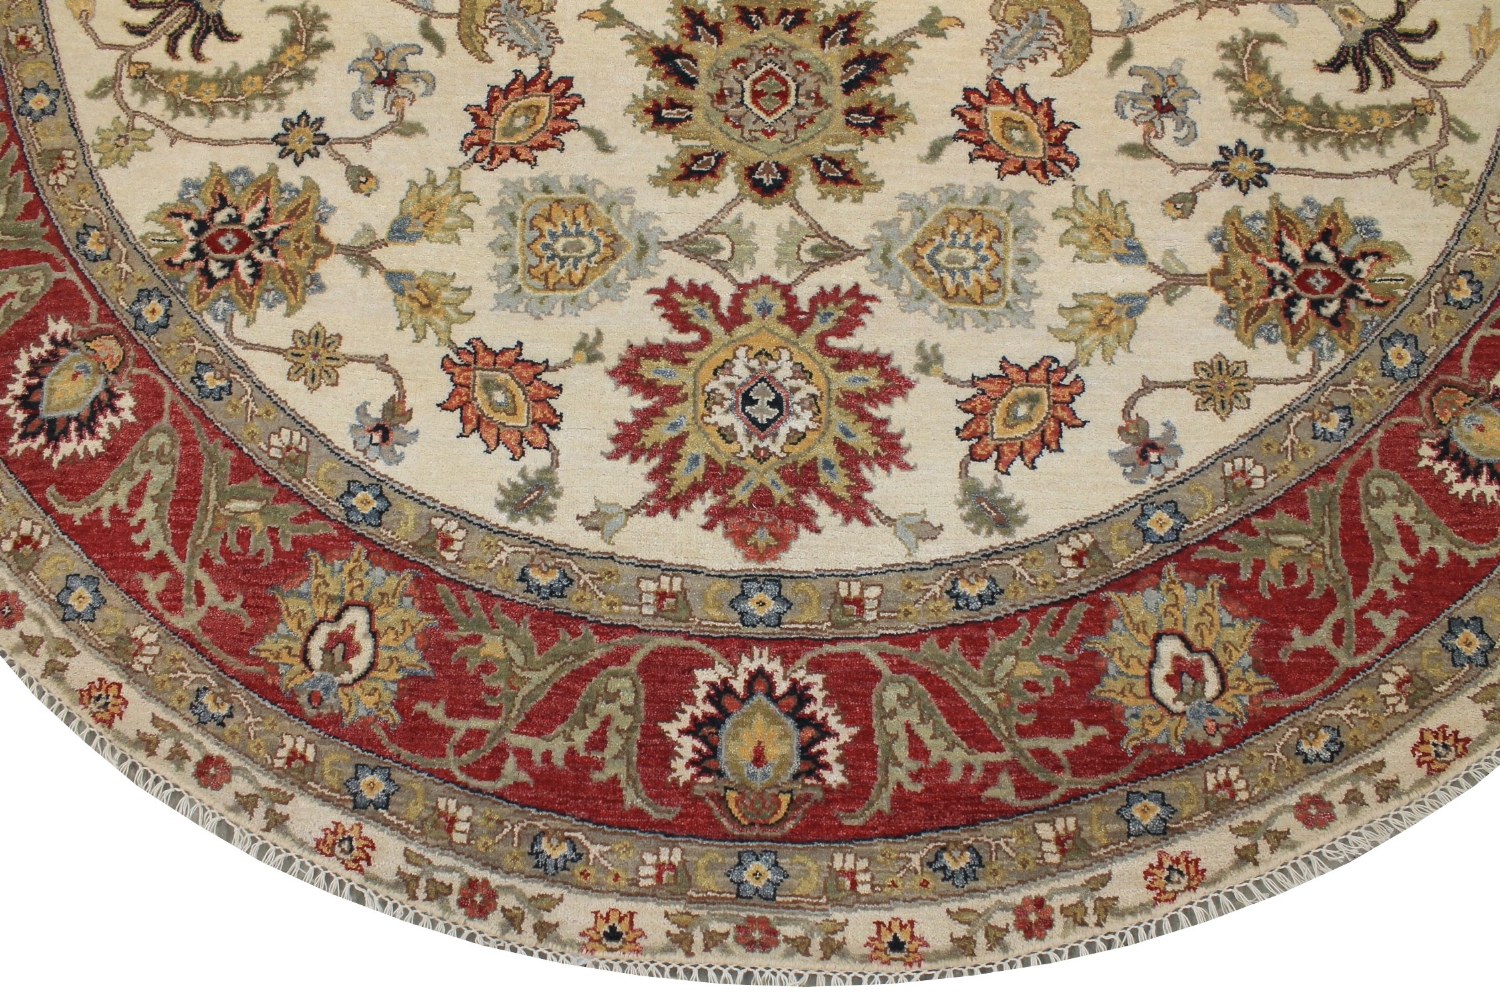 8 ft. Round & Square Traditional Hand Knotted Wool Area Rug - MR028715